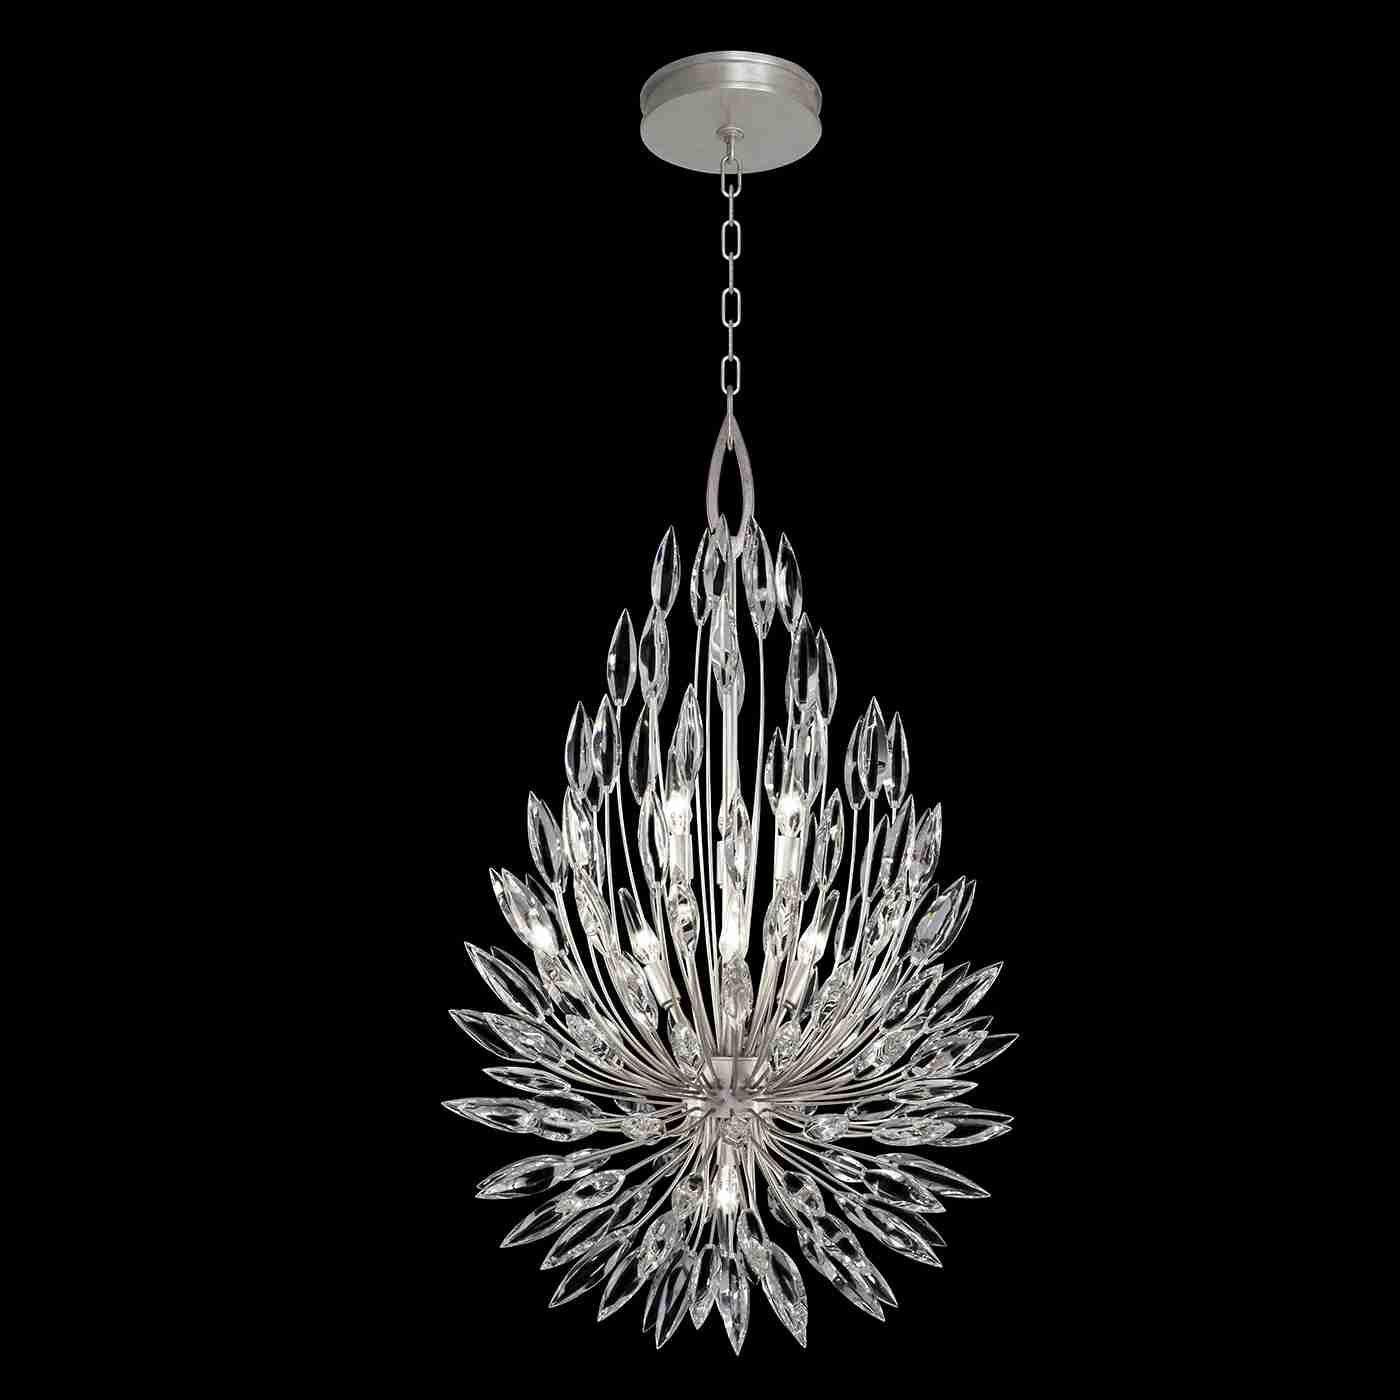 Fine Art Handcrafted Lighting - Lily Buds Pendant - Lights Canada